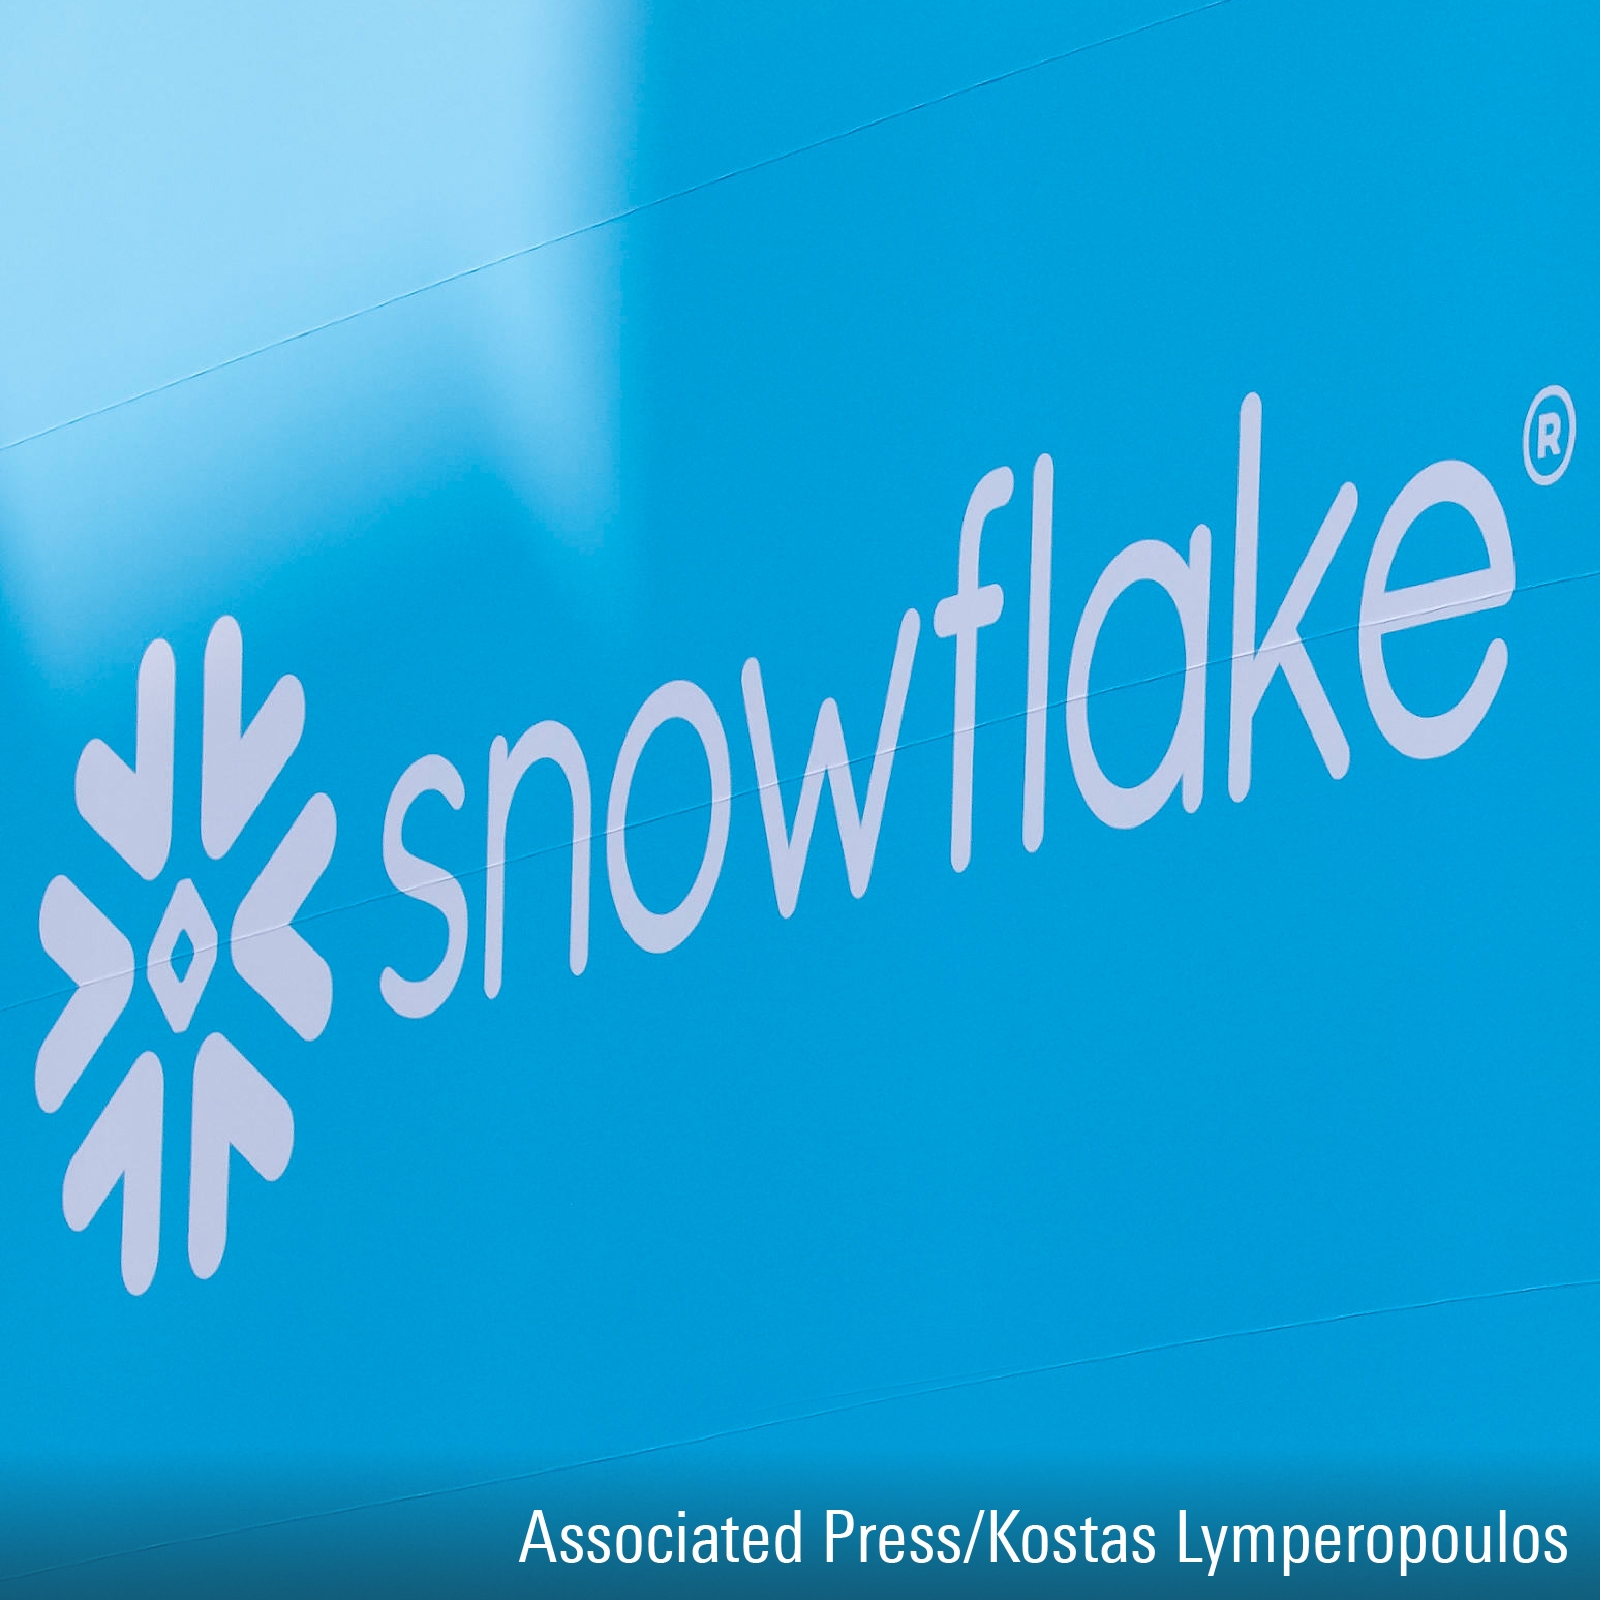 After Earnings, Is Snowflake Stock a Buy, a Sell, or Fairly Valued?